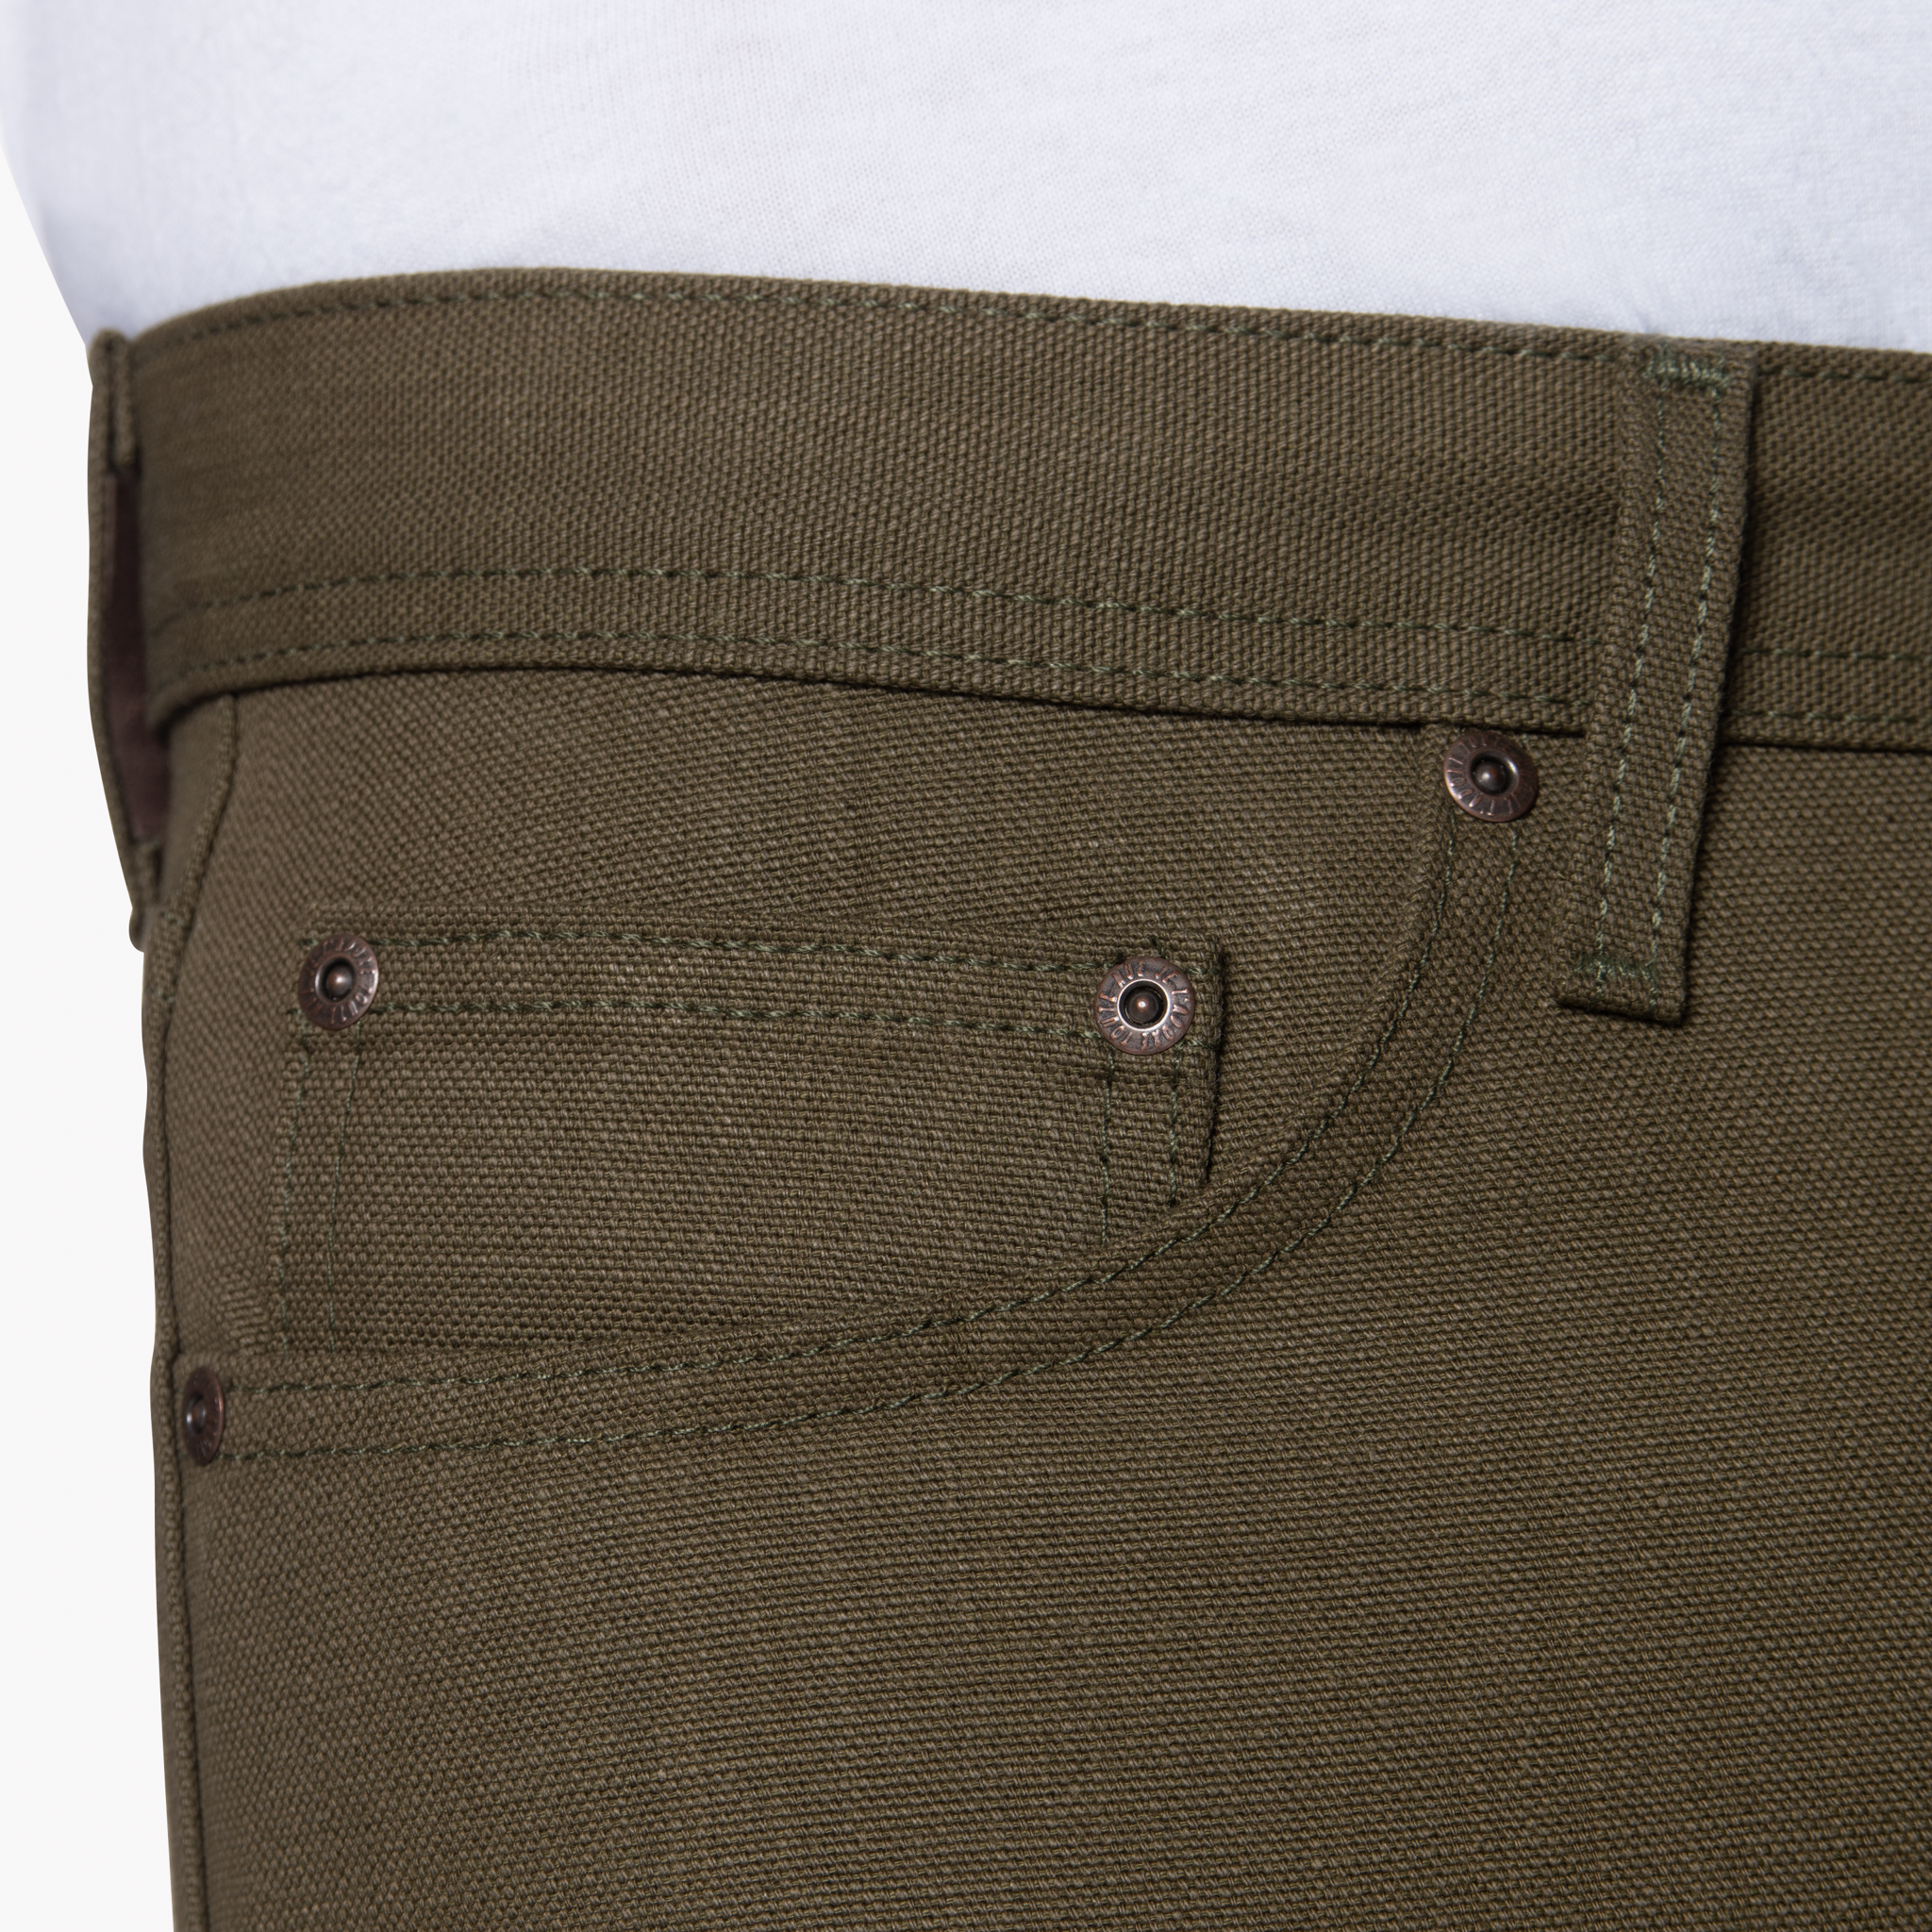  Raw Cotton Canvas - Olive - coin pocket 